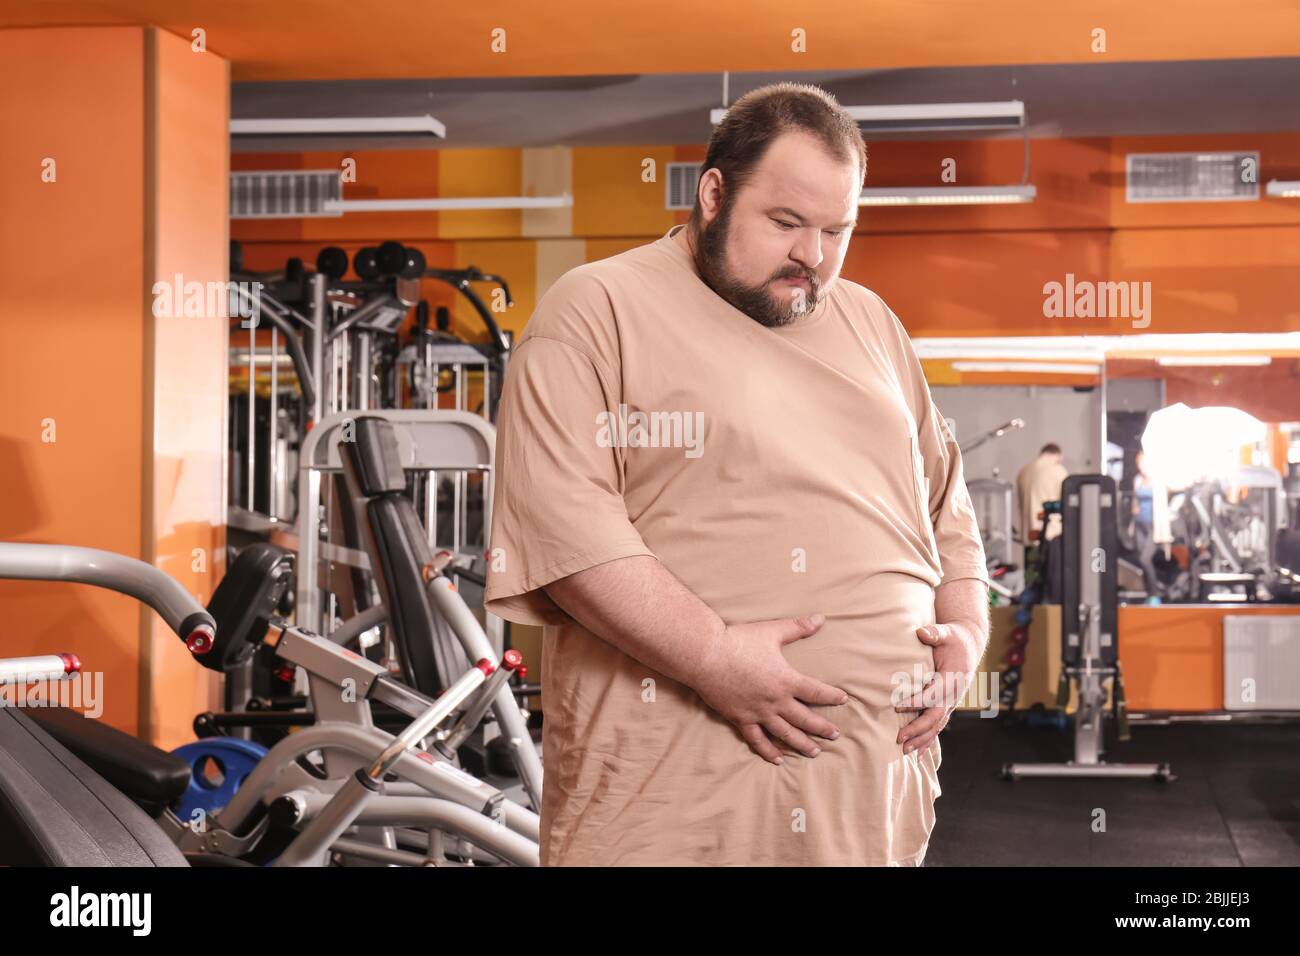 Overweight man in gym Stock Photo